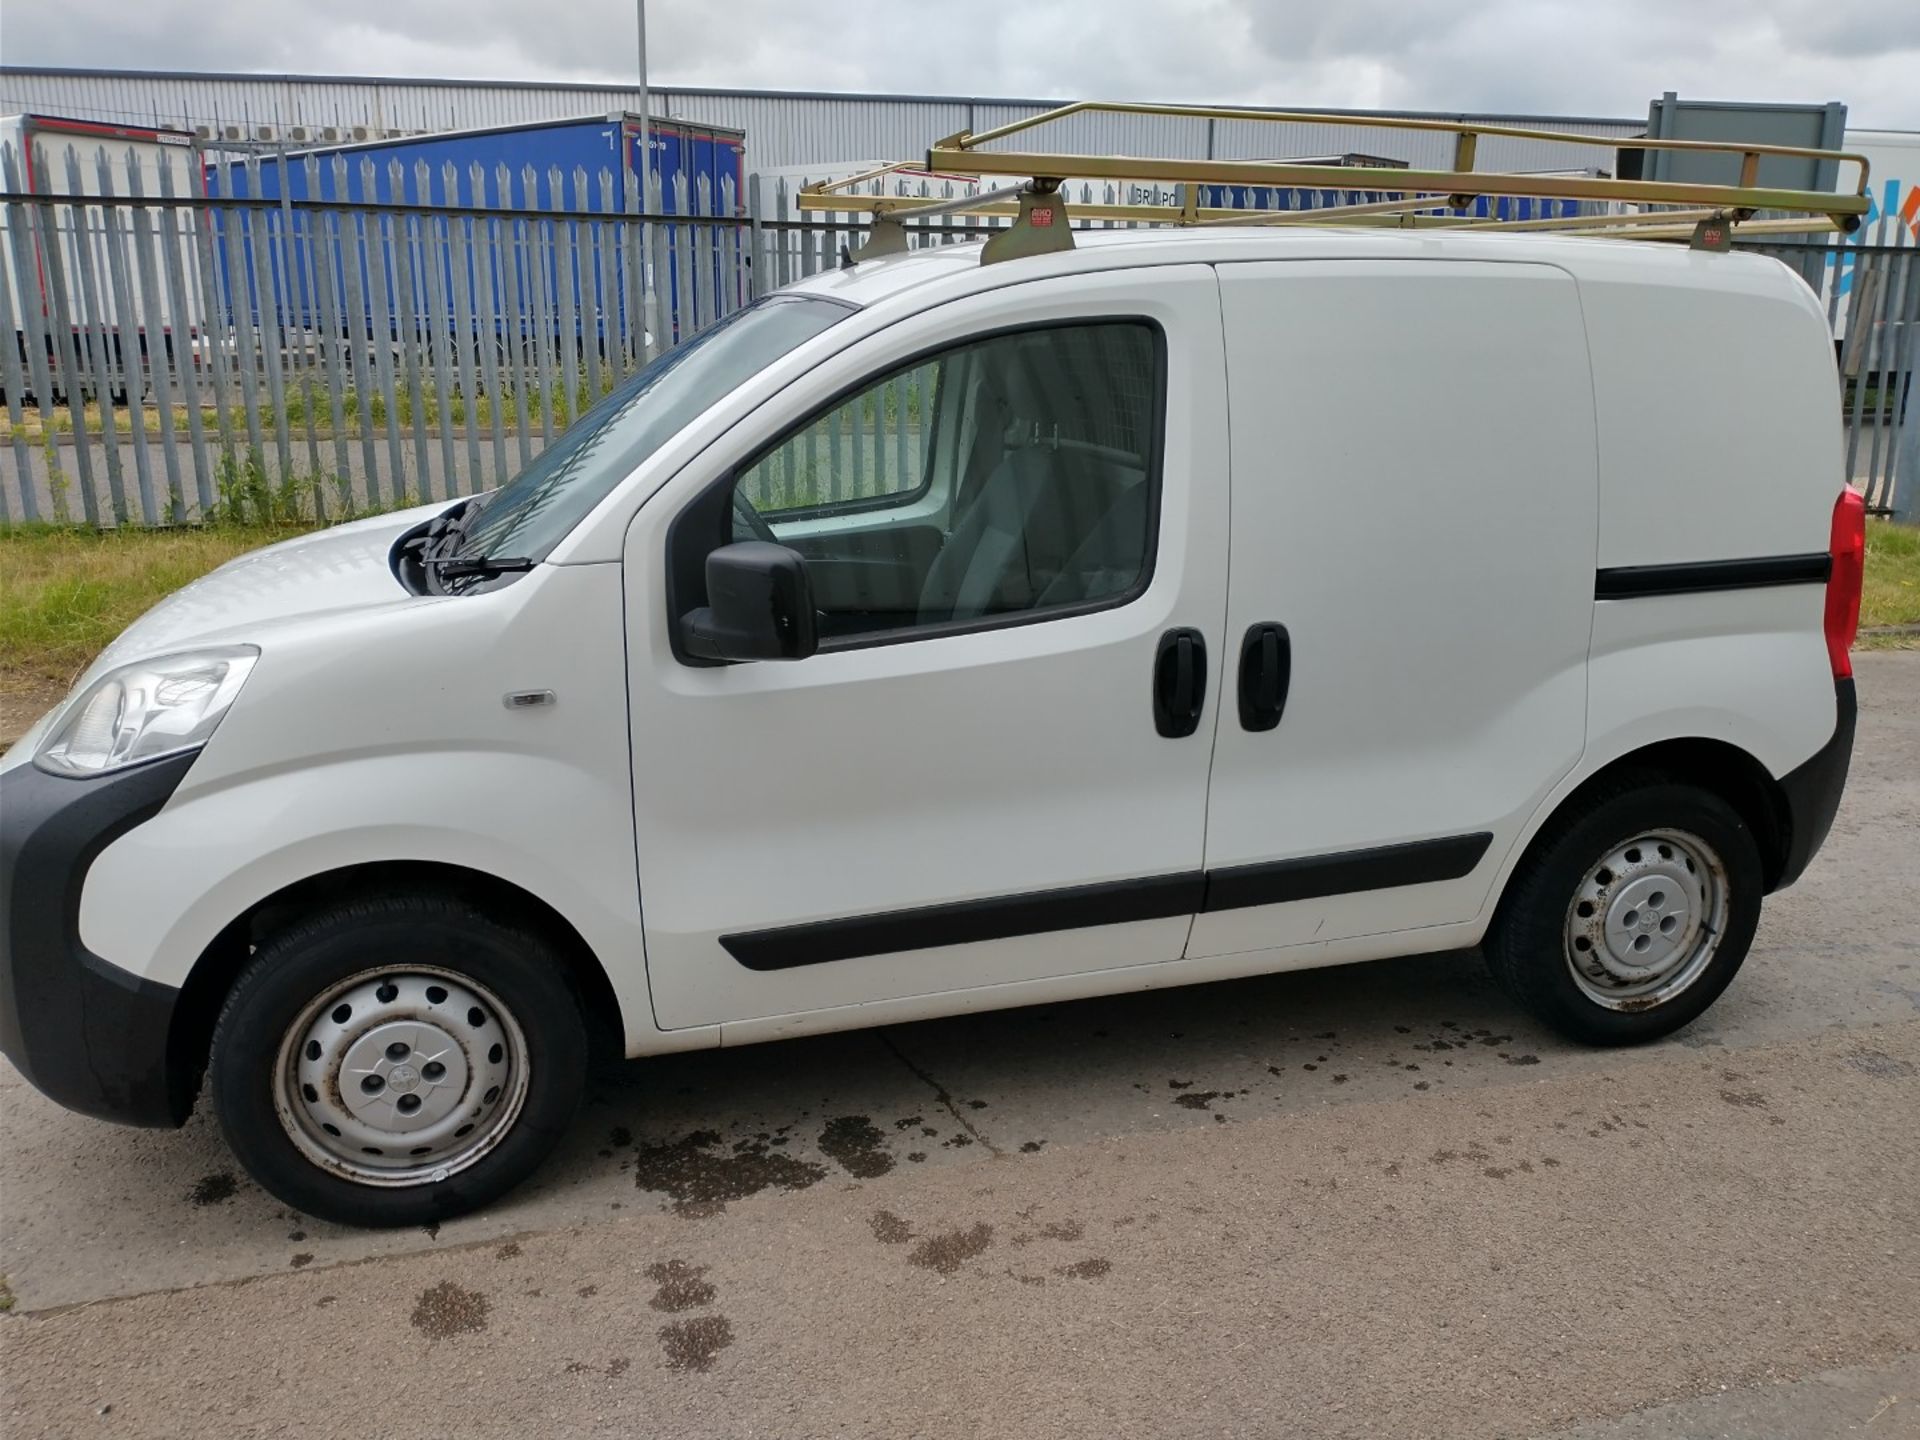 2015 Peugeot Bipper S Hdi White Panel - CL505 - Ref: VVS031 - Location: Corby, Northamptonshire106, - Image 6 of 16